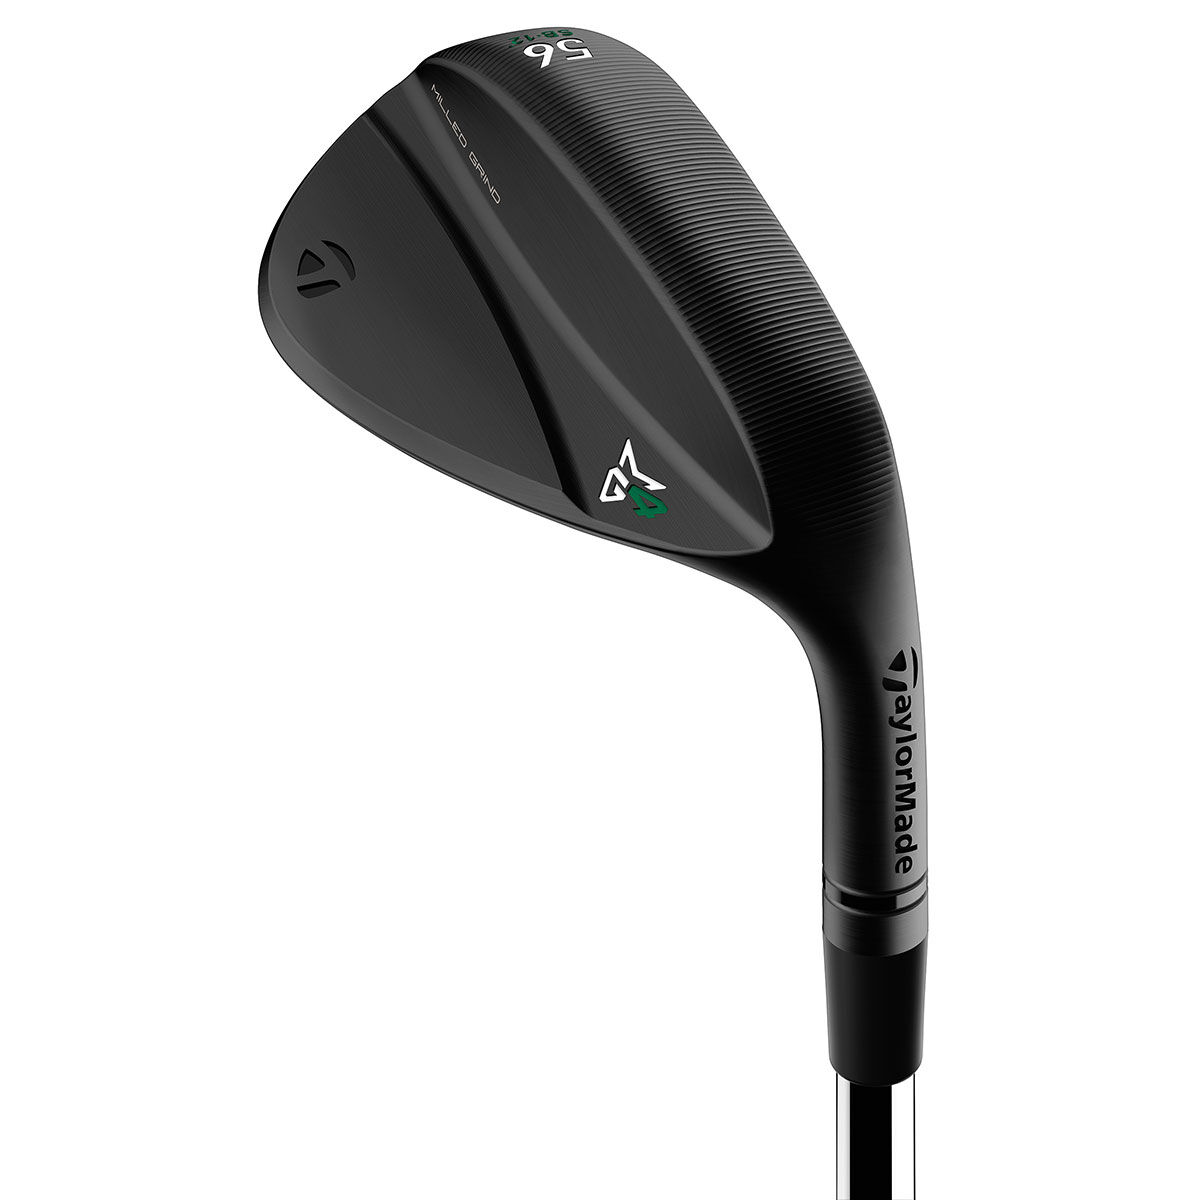 TaylorMade Men's Black Milled Grind 4 Golf Wedge - Custom Fit | American Golf, One Size von TaylorMade